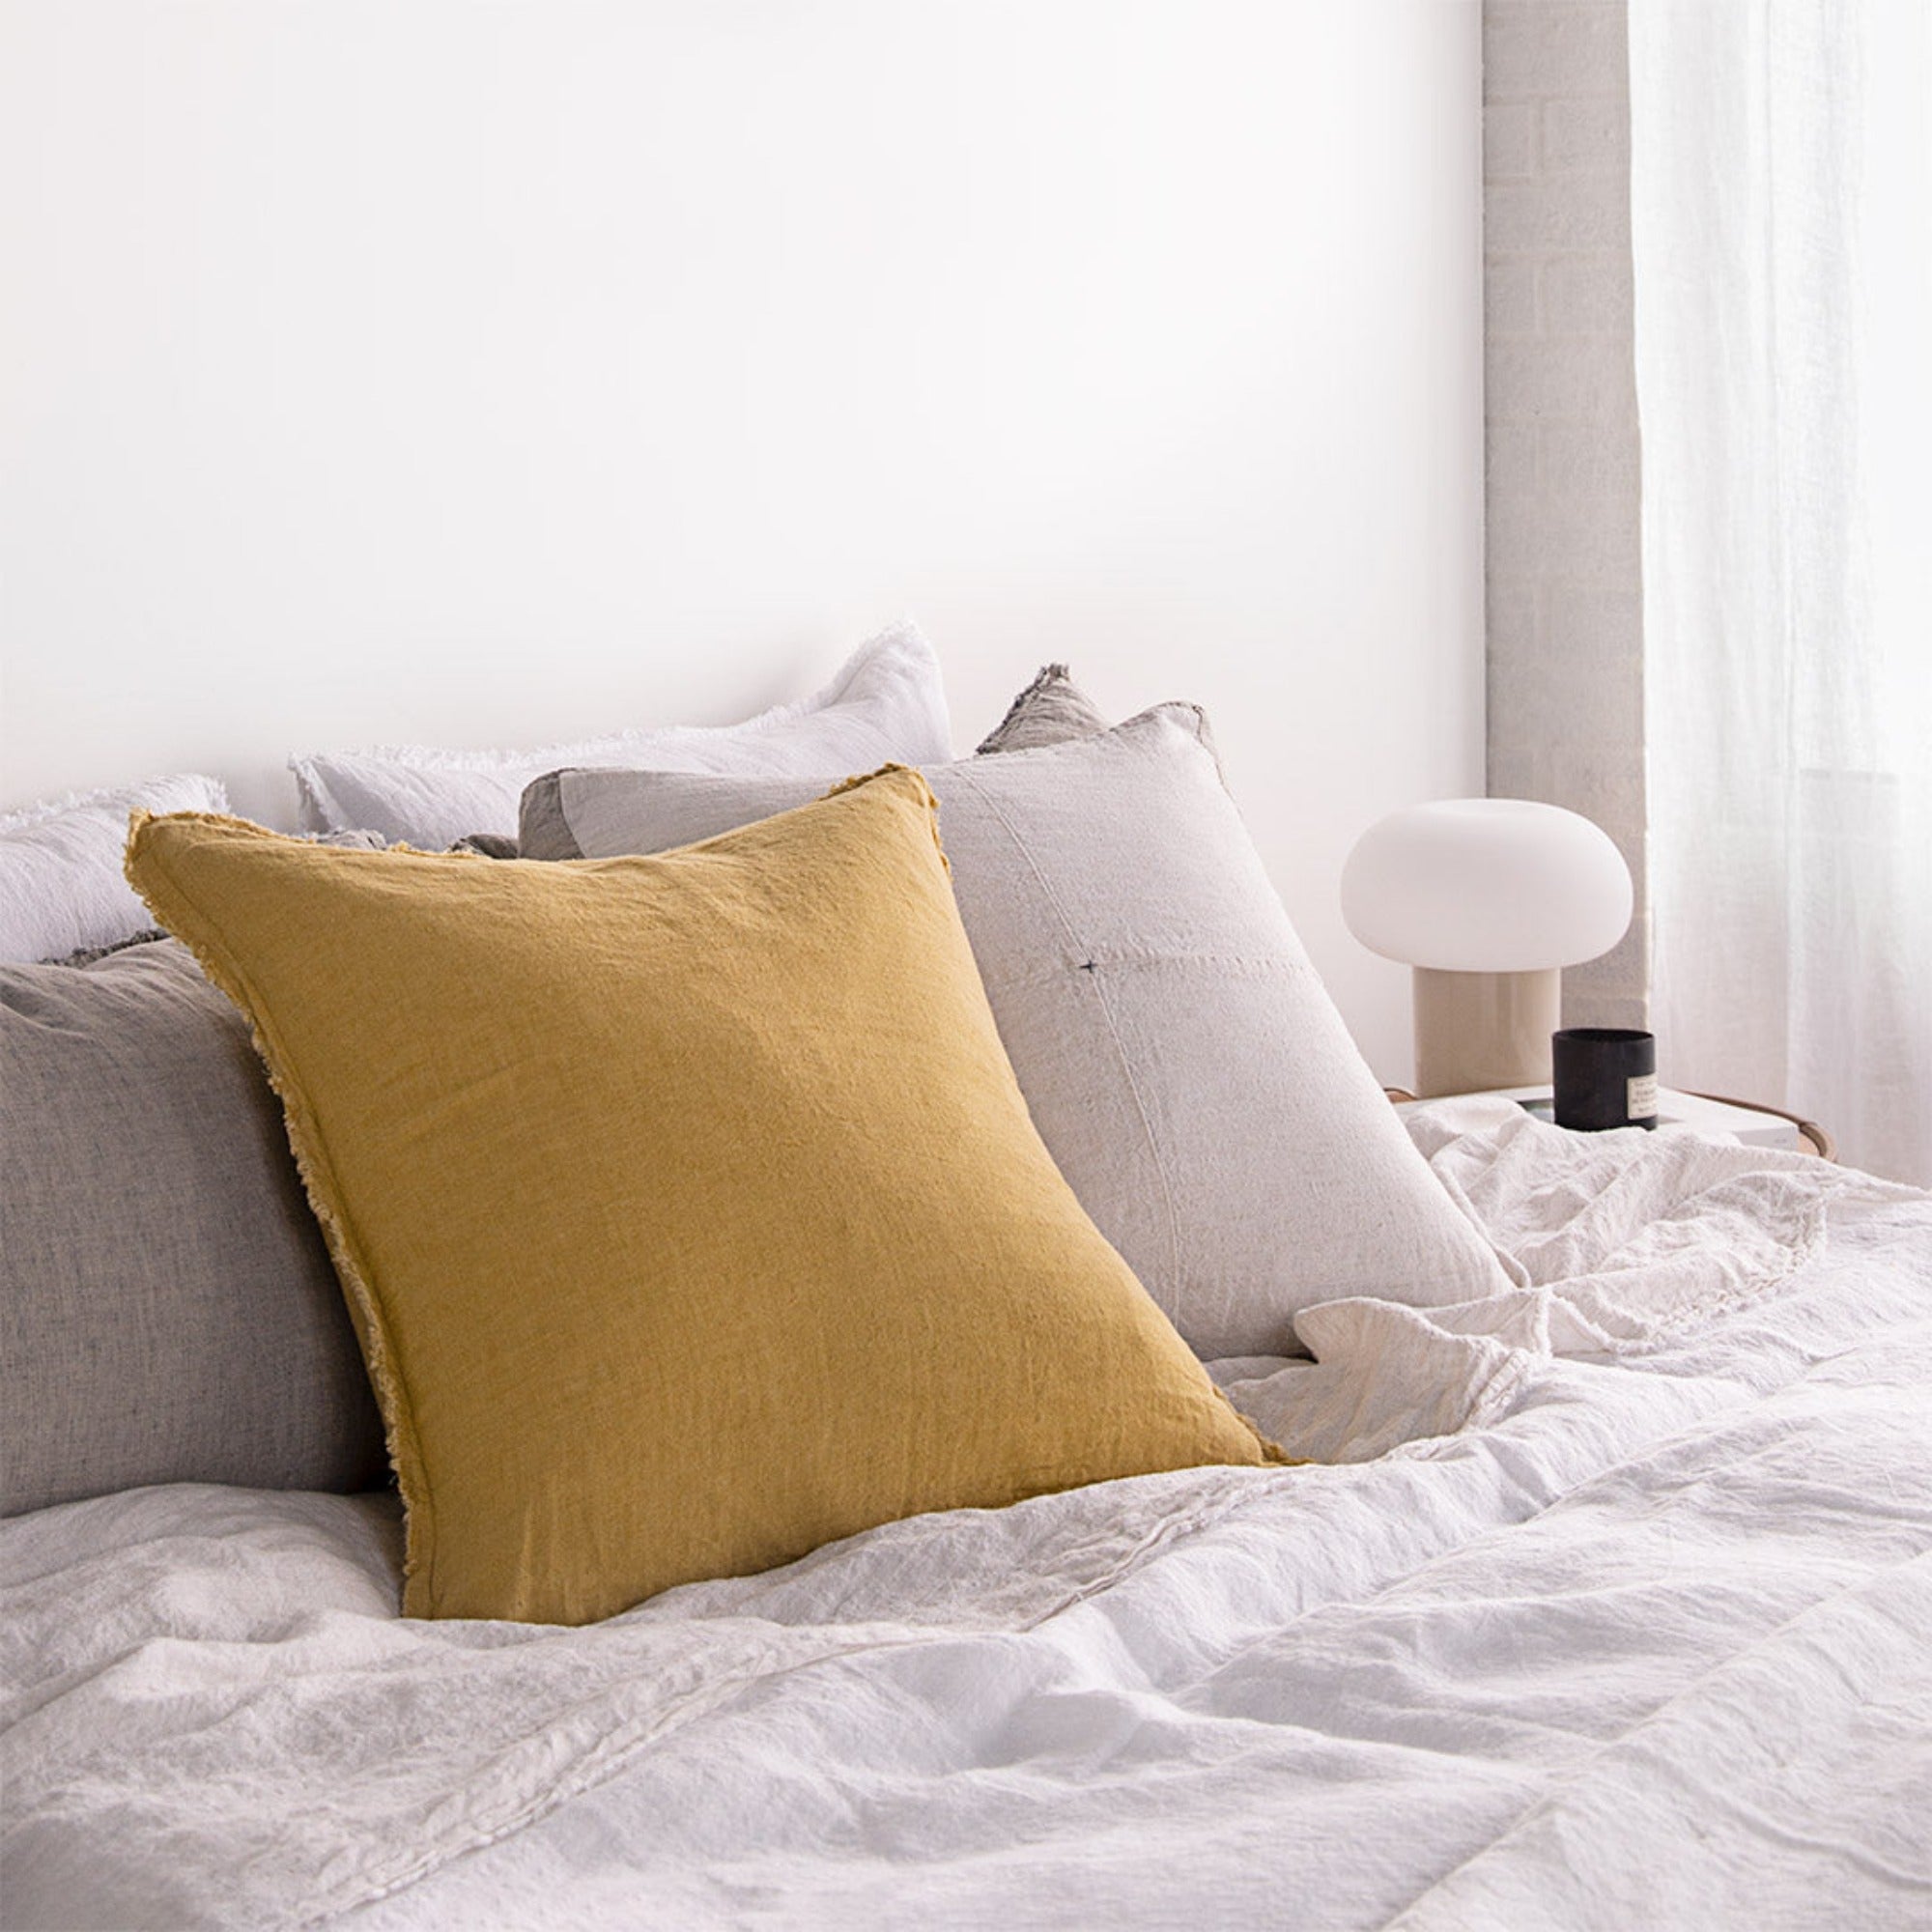 Linen Cushion & Cover | Muted Gold | Hale Mercantile Co.